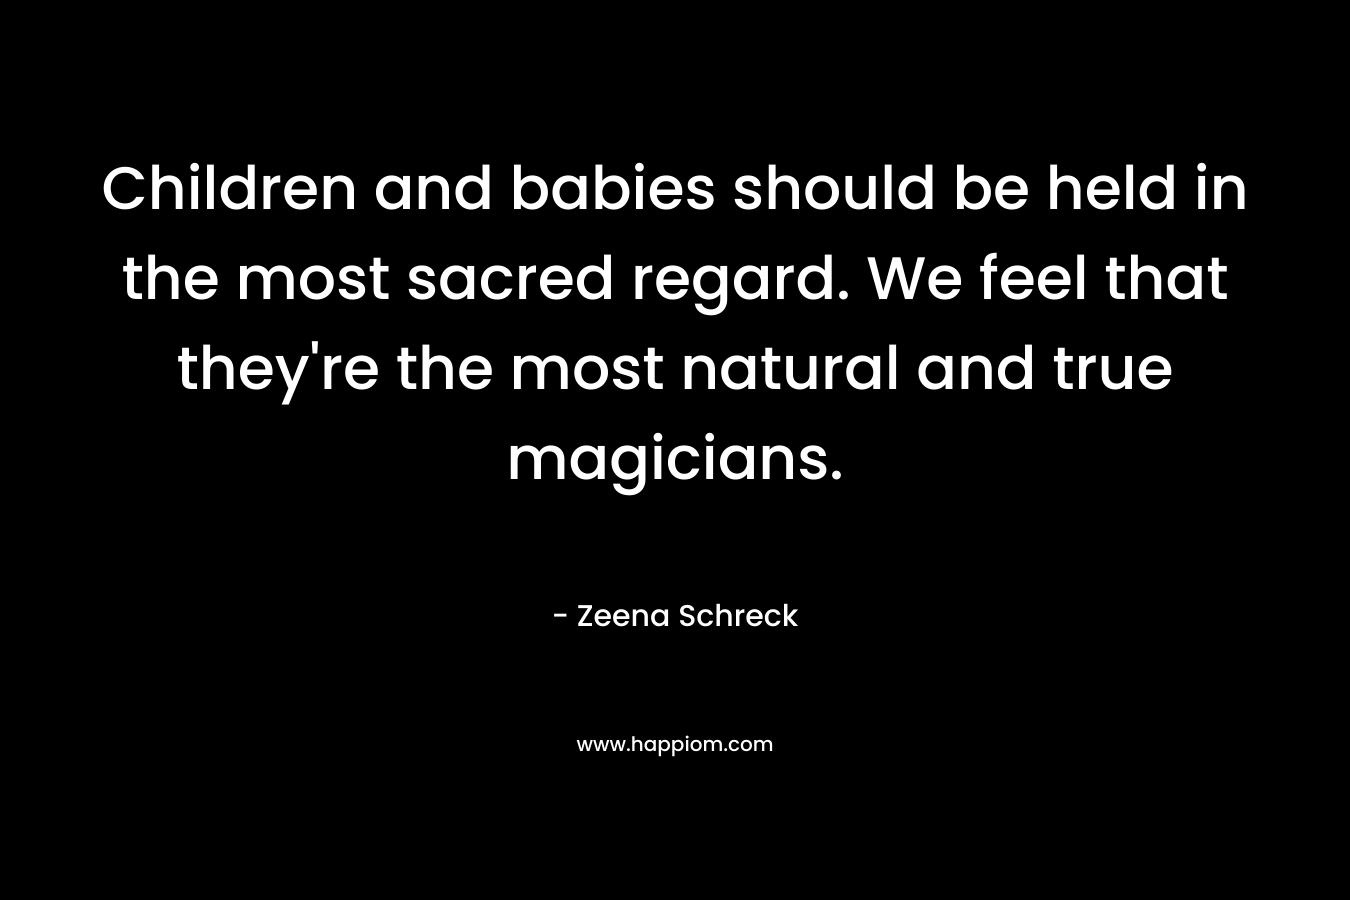 Children and babies should be held in the most sacred regard. We feel that they're the most natural and true magicians.